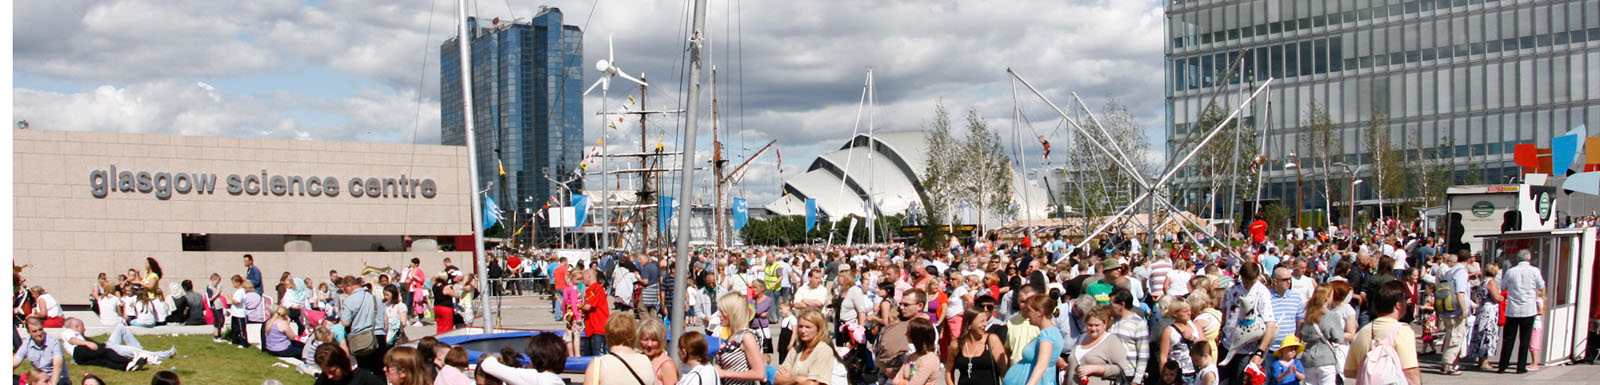 Festival goers at Pacific Quay and SECC